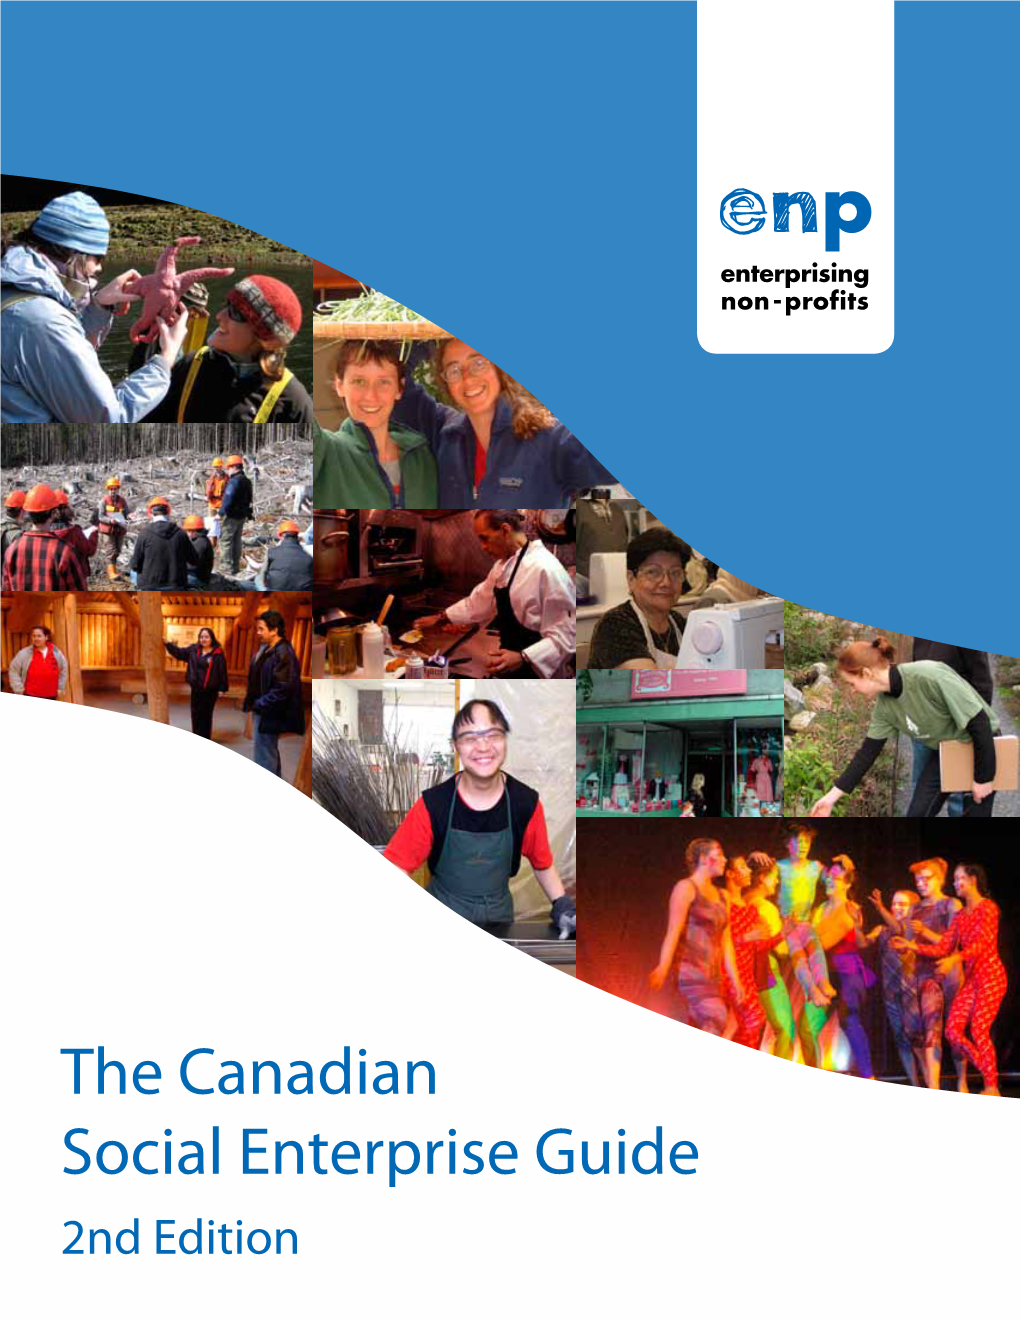 The Canadian Social Enterprise Guide 2Nd Edition Funding for the Second Edition of the Social Enterprise Guide Was Provided By